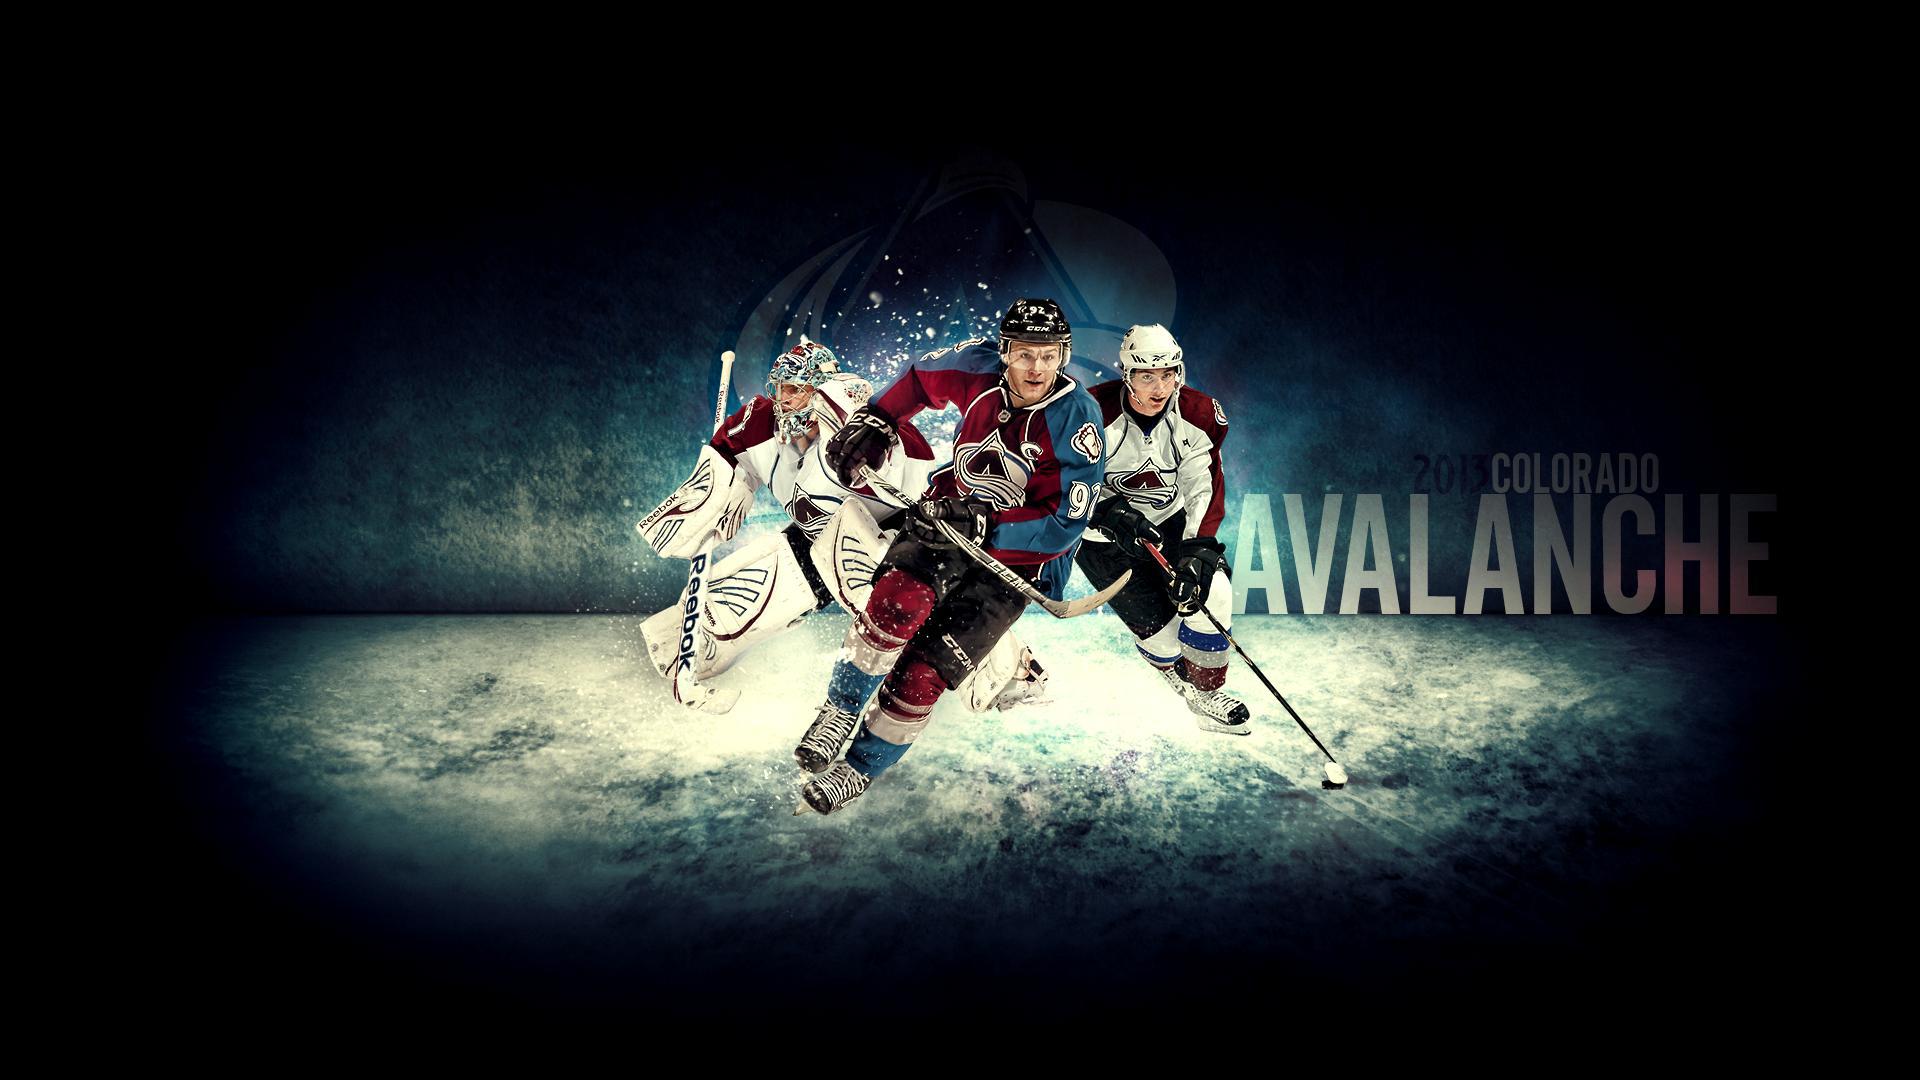 NHL player Gabriel Landeskog wallpapers and images - wallpapers ...